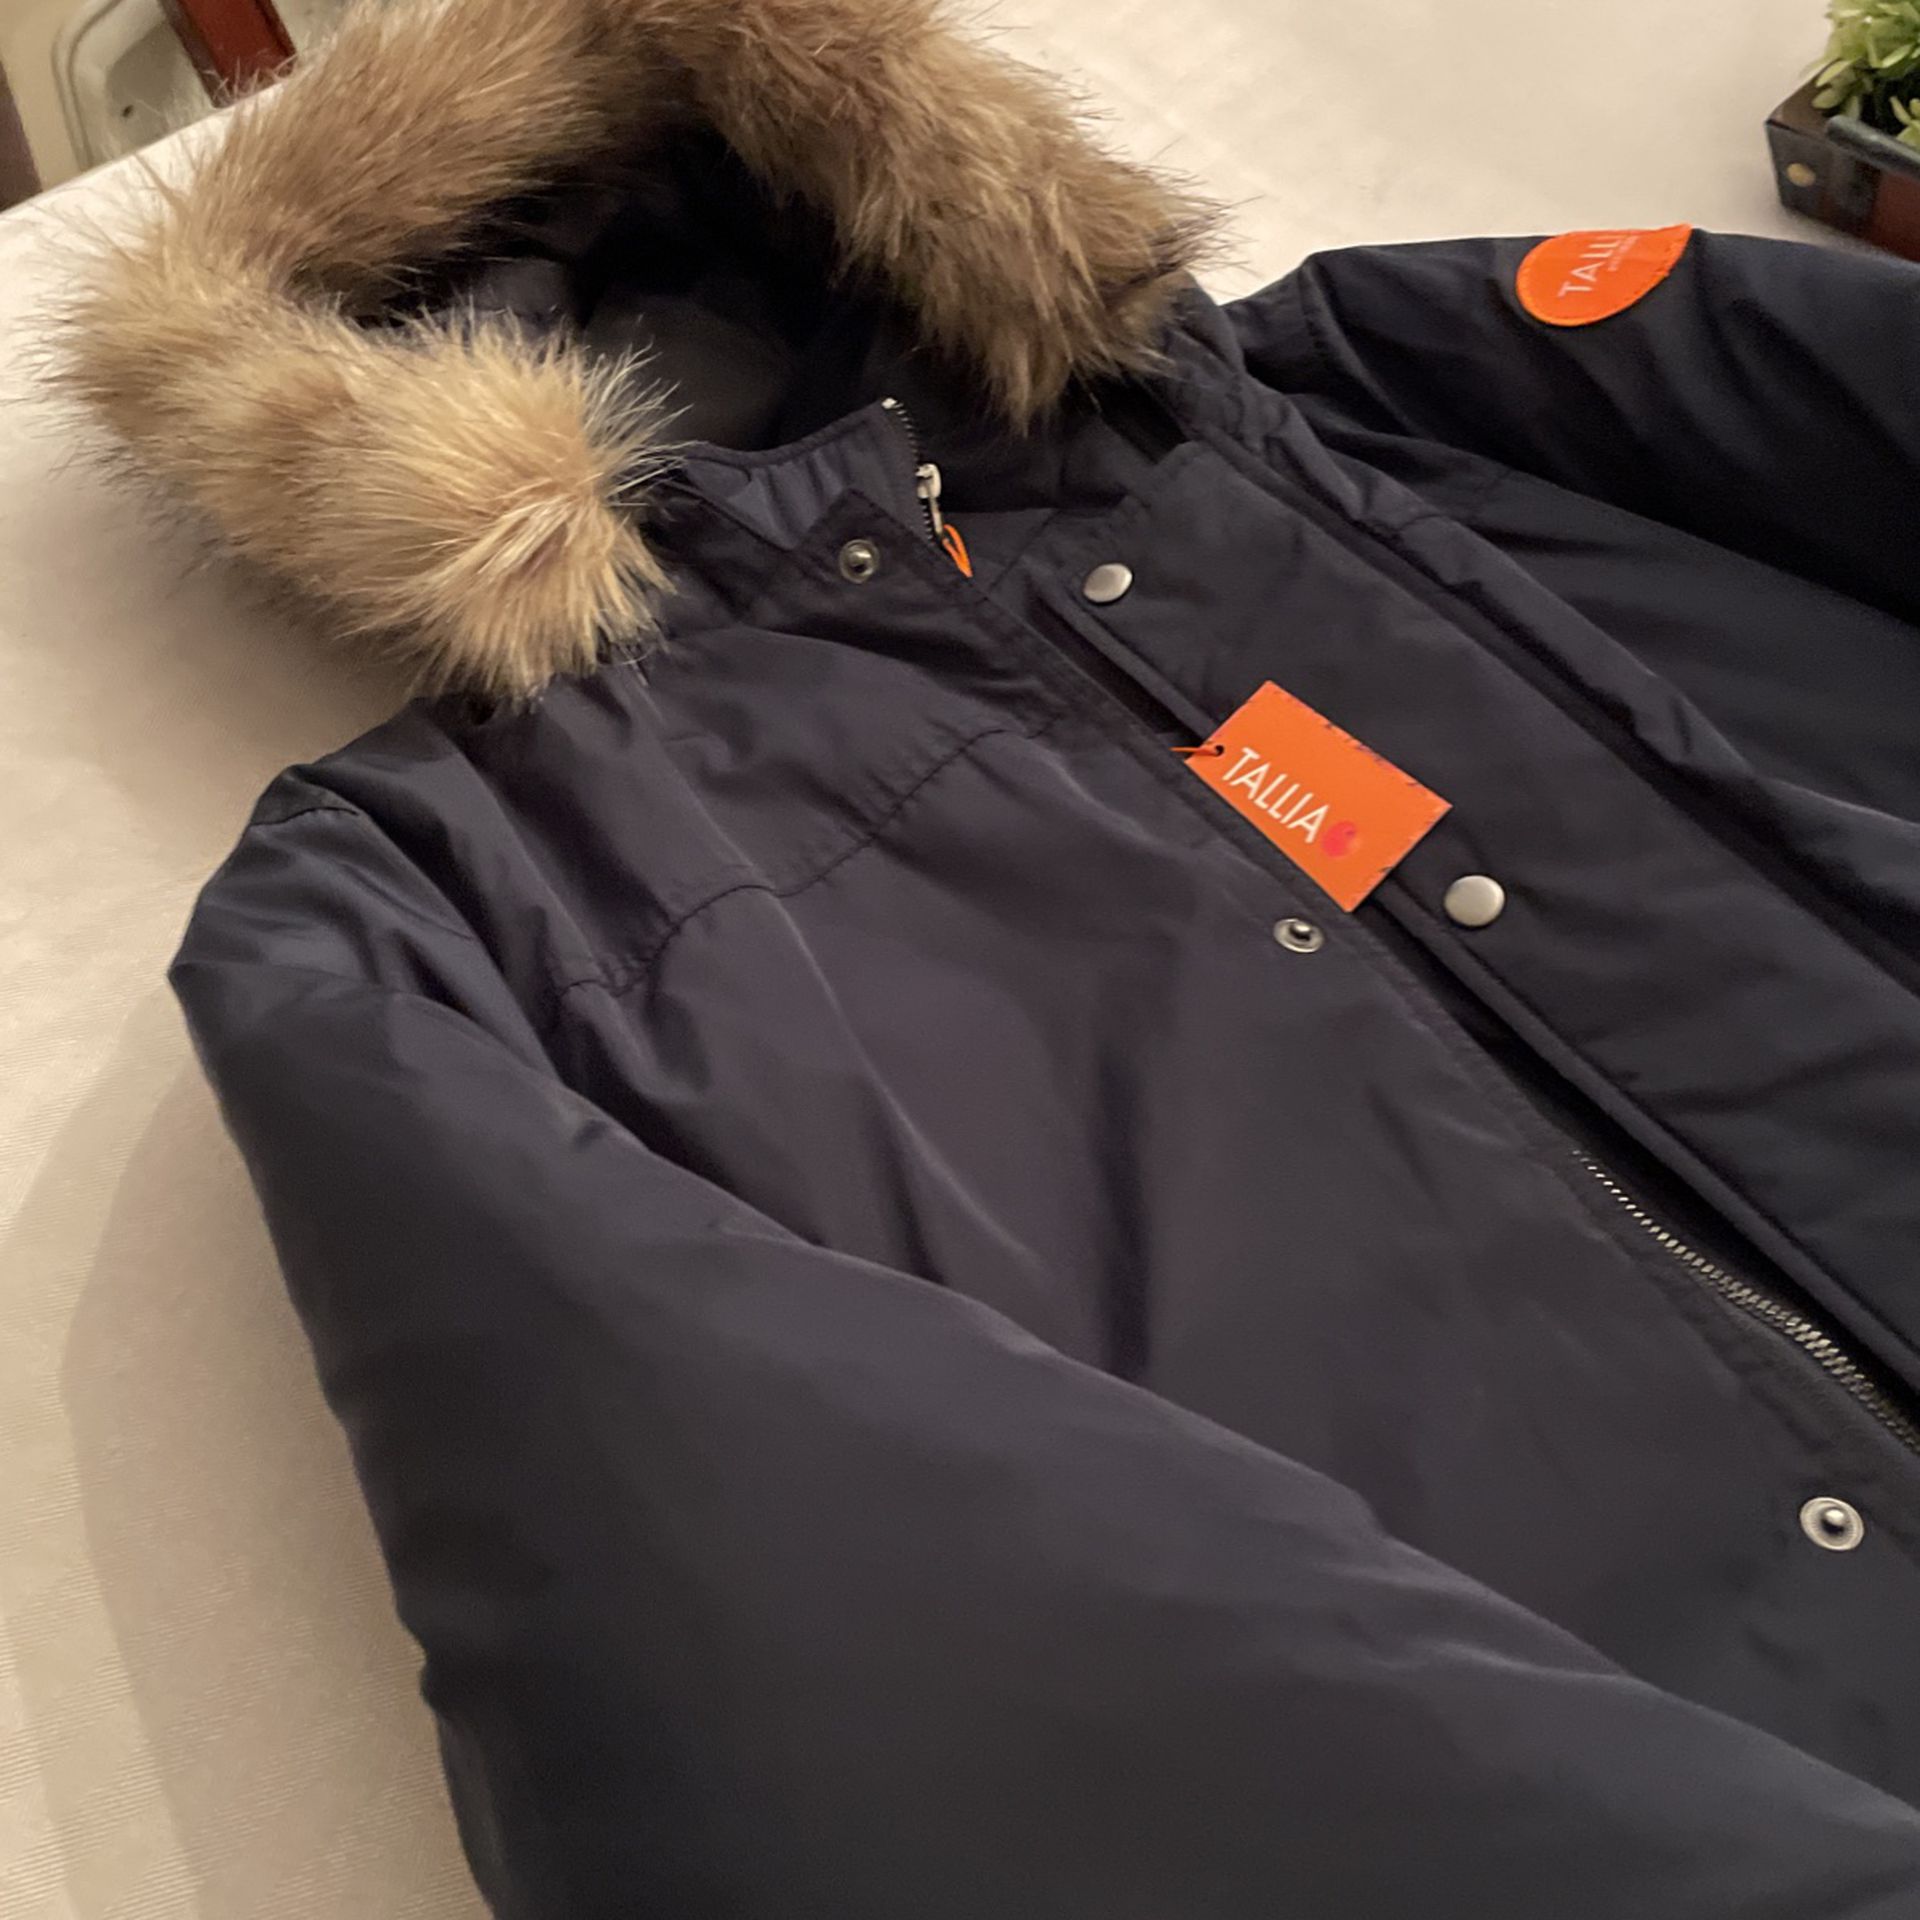 Kids/teen Winter Coat for Sale in Chicago, IL - OfferUp